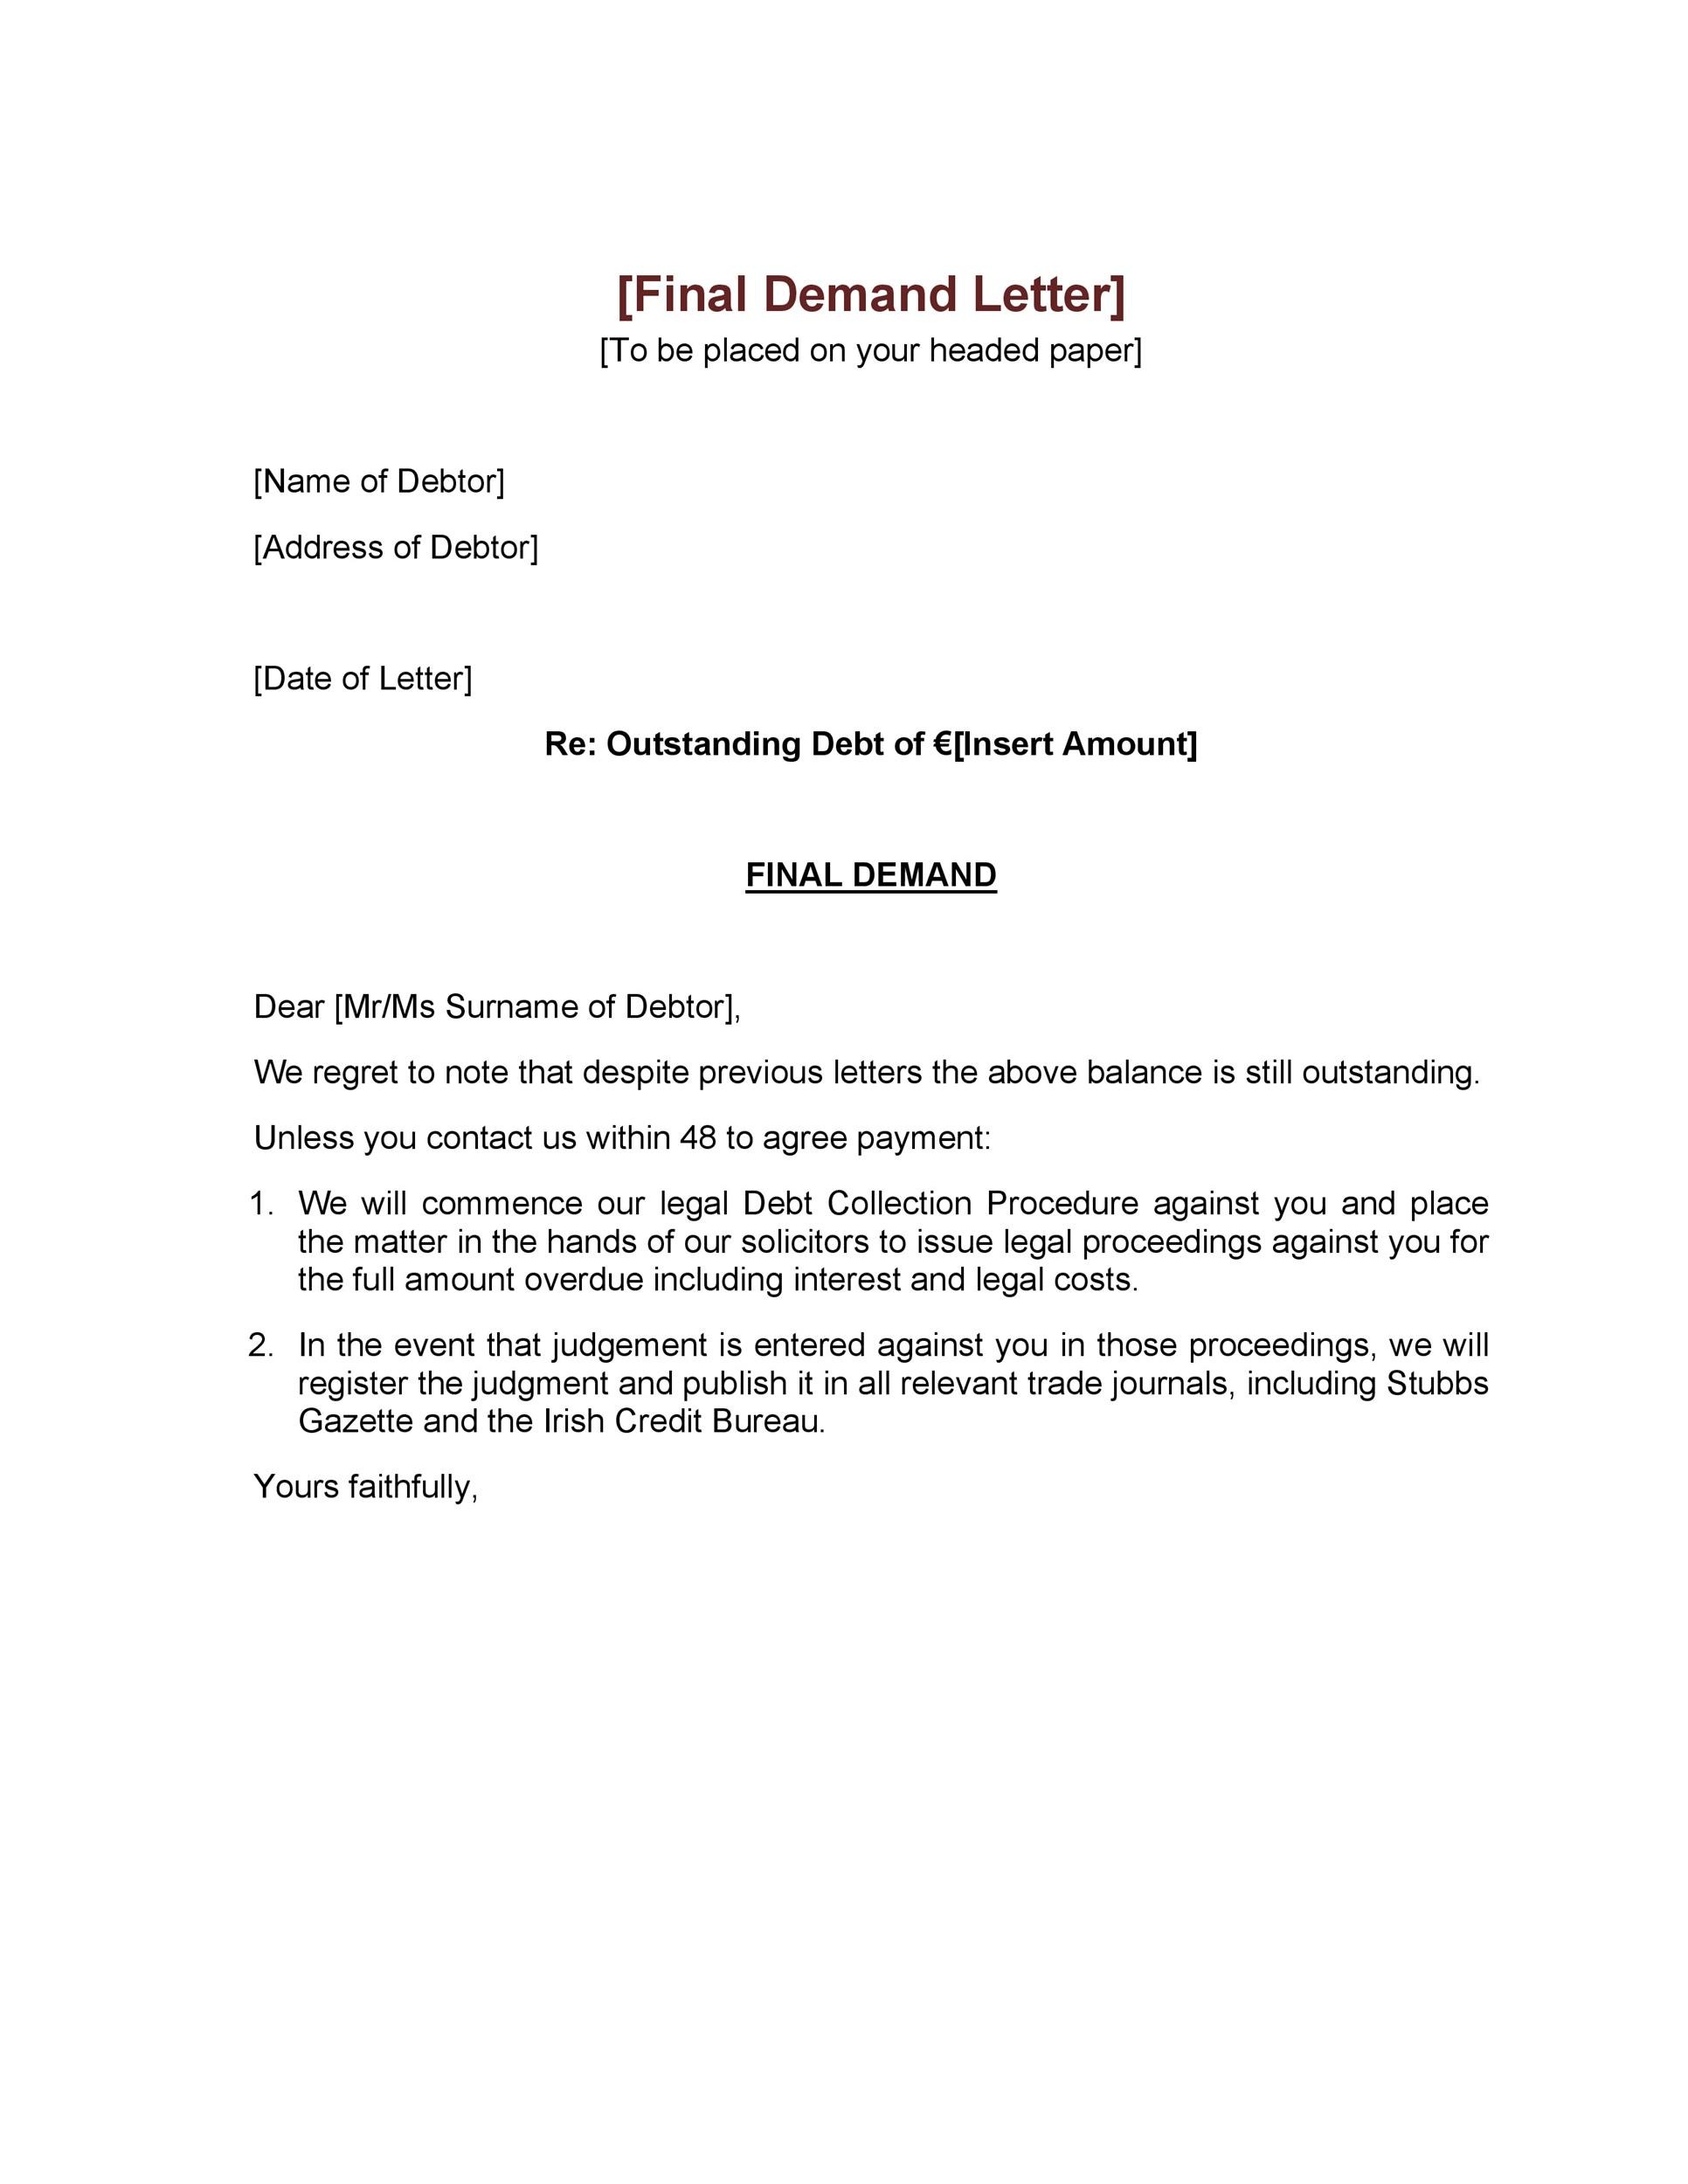 40 Best Demand Letter Templates Free Samples Template Lab